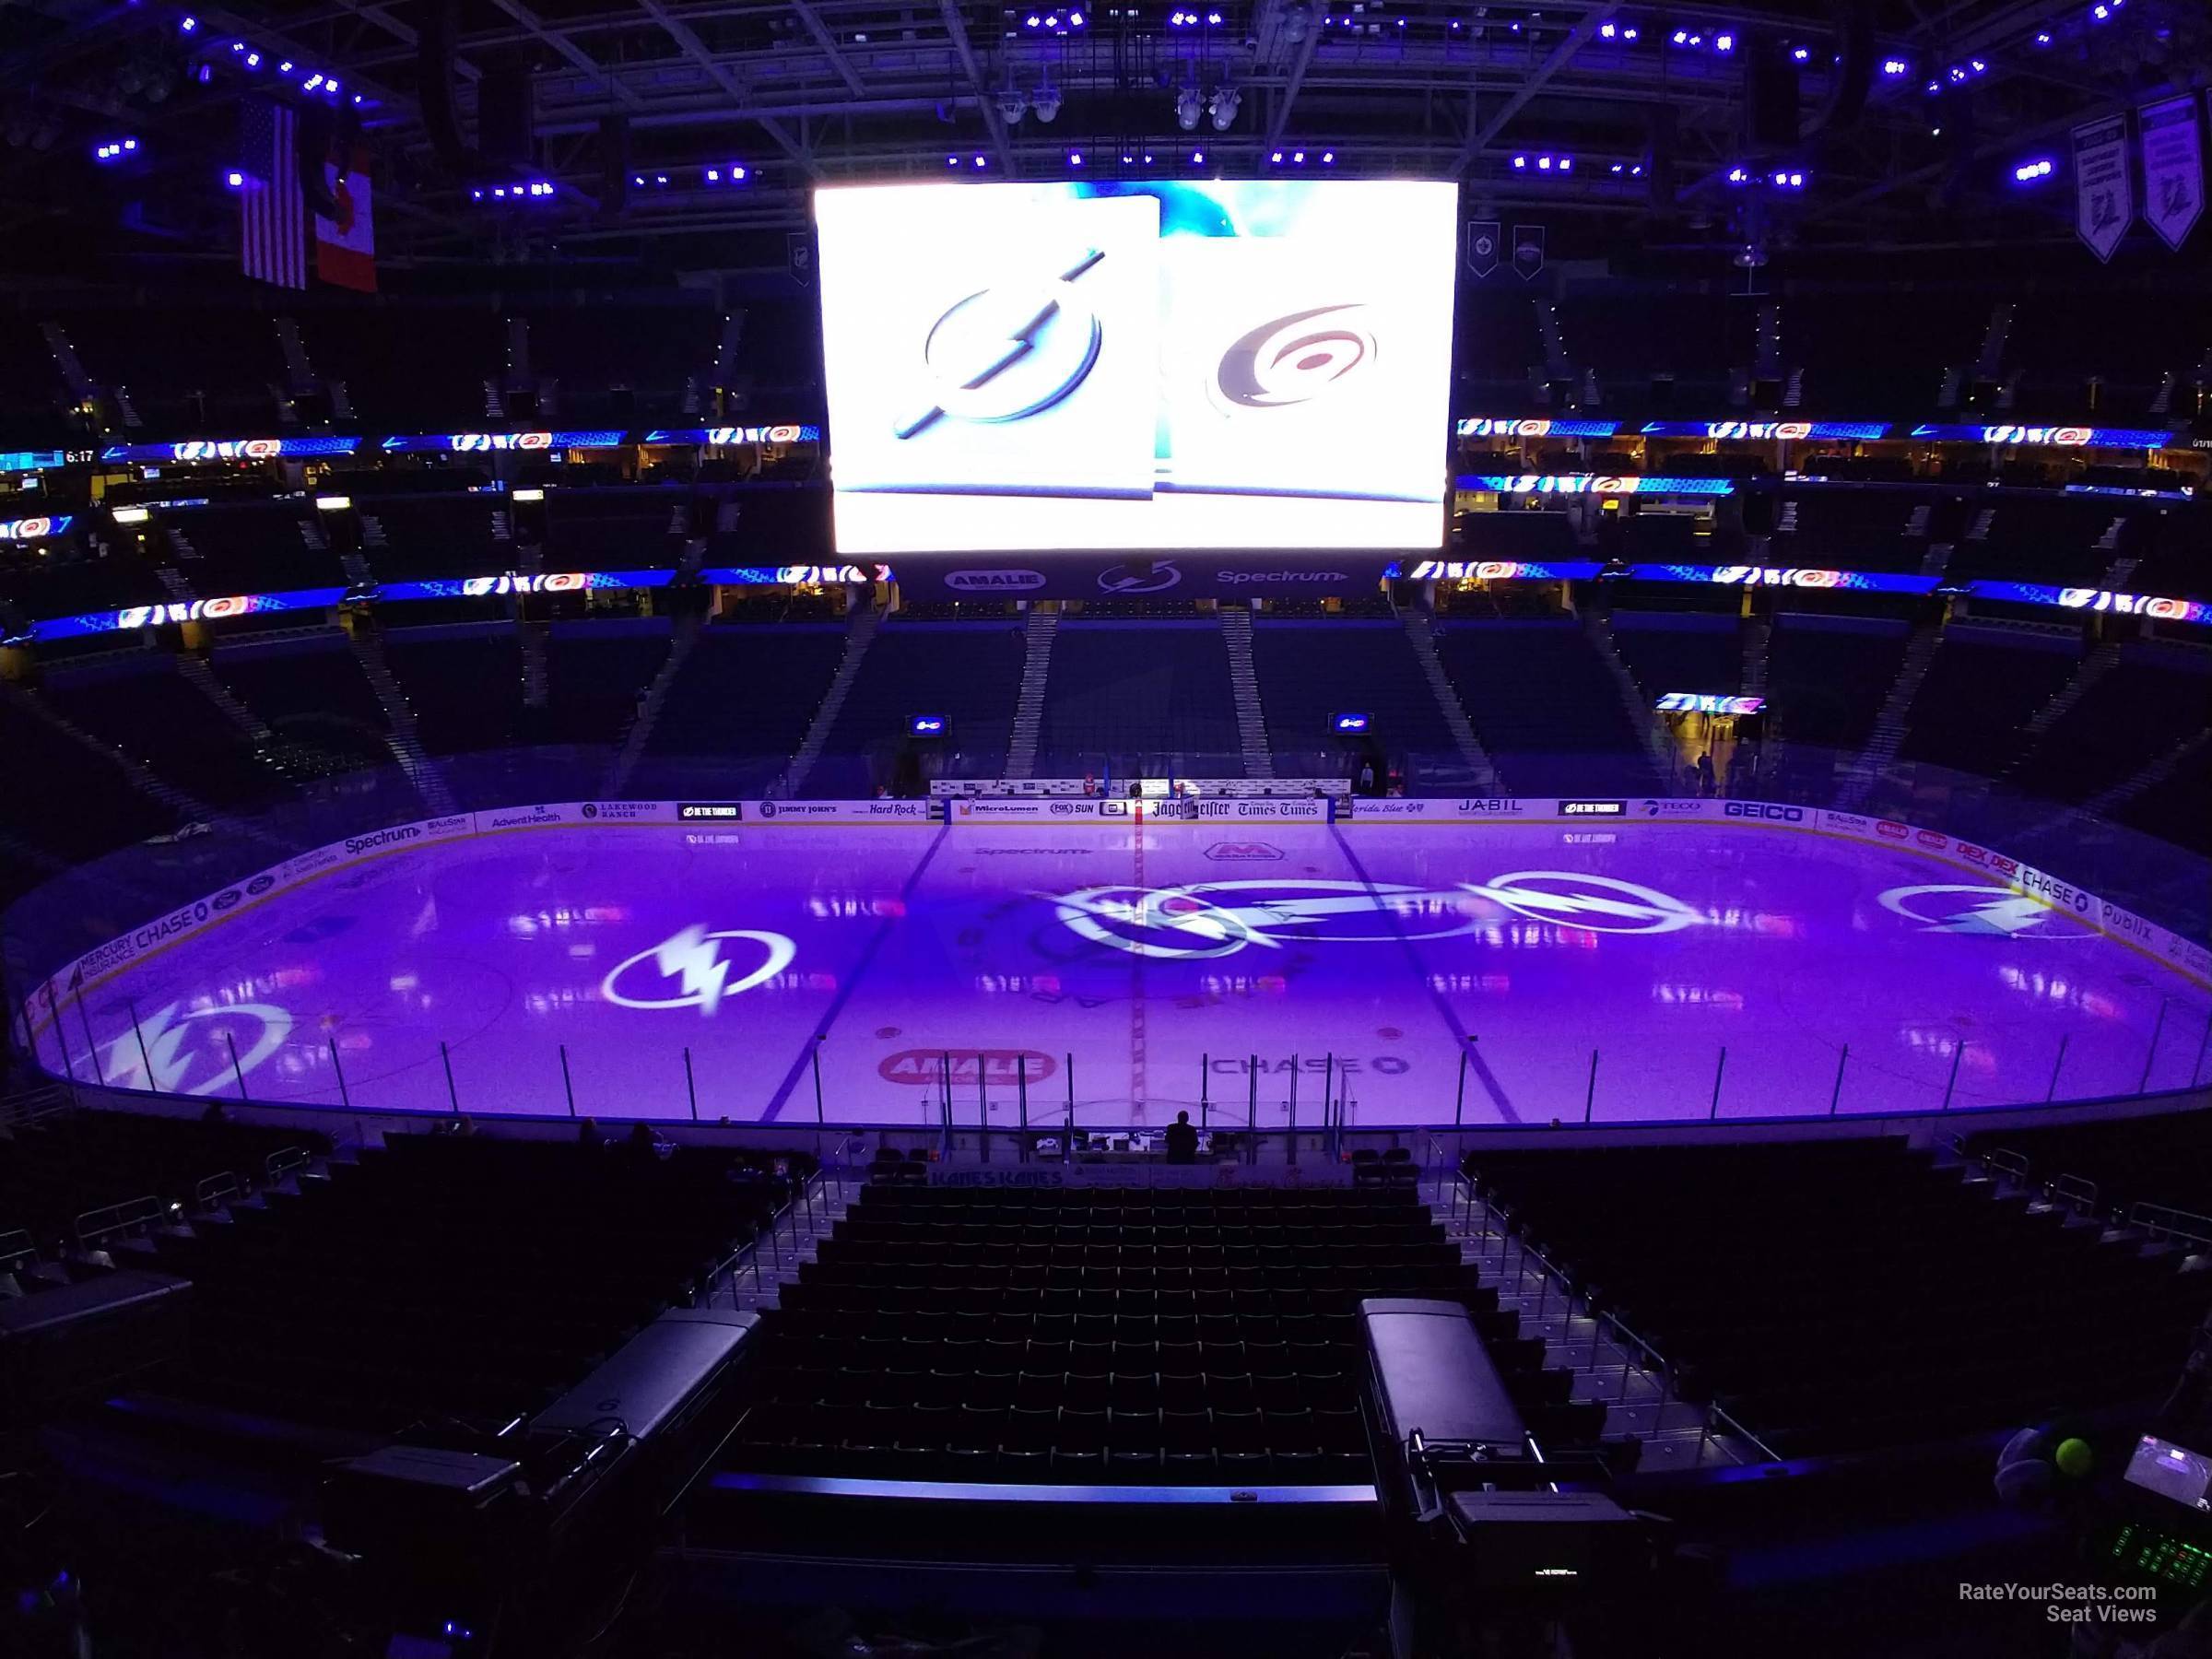 Section 216 at Amalie Arena 